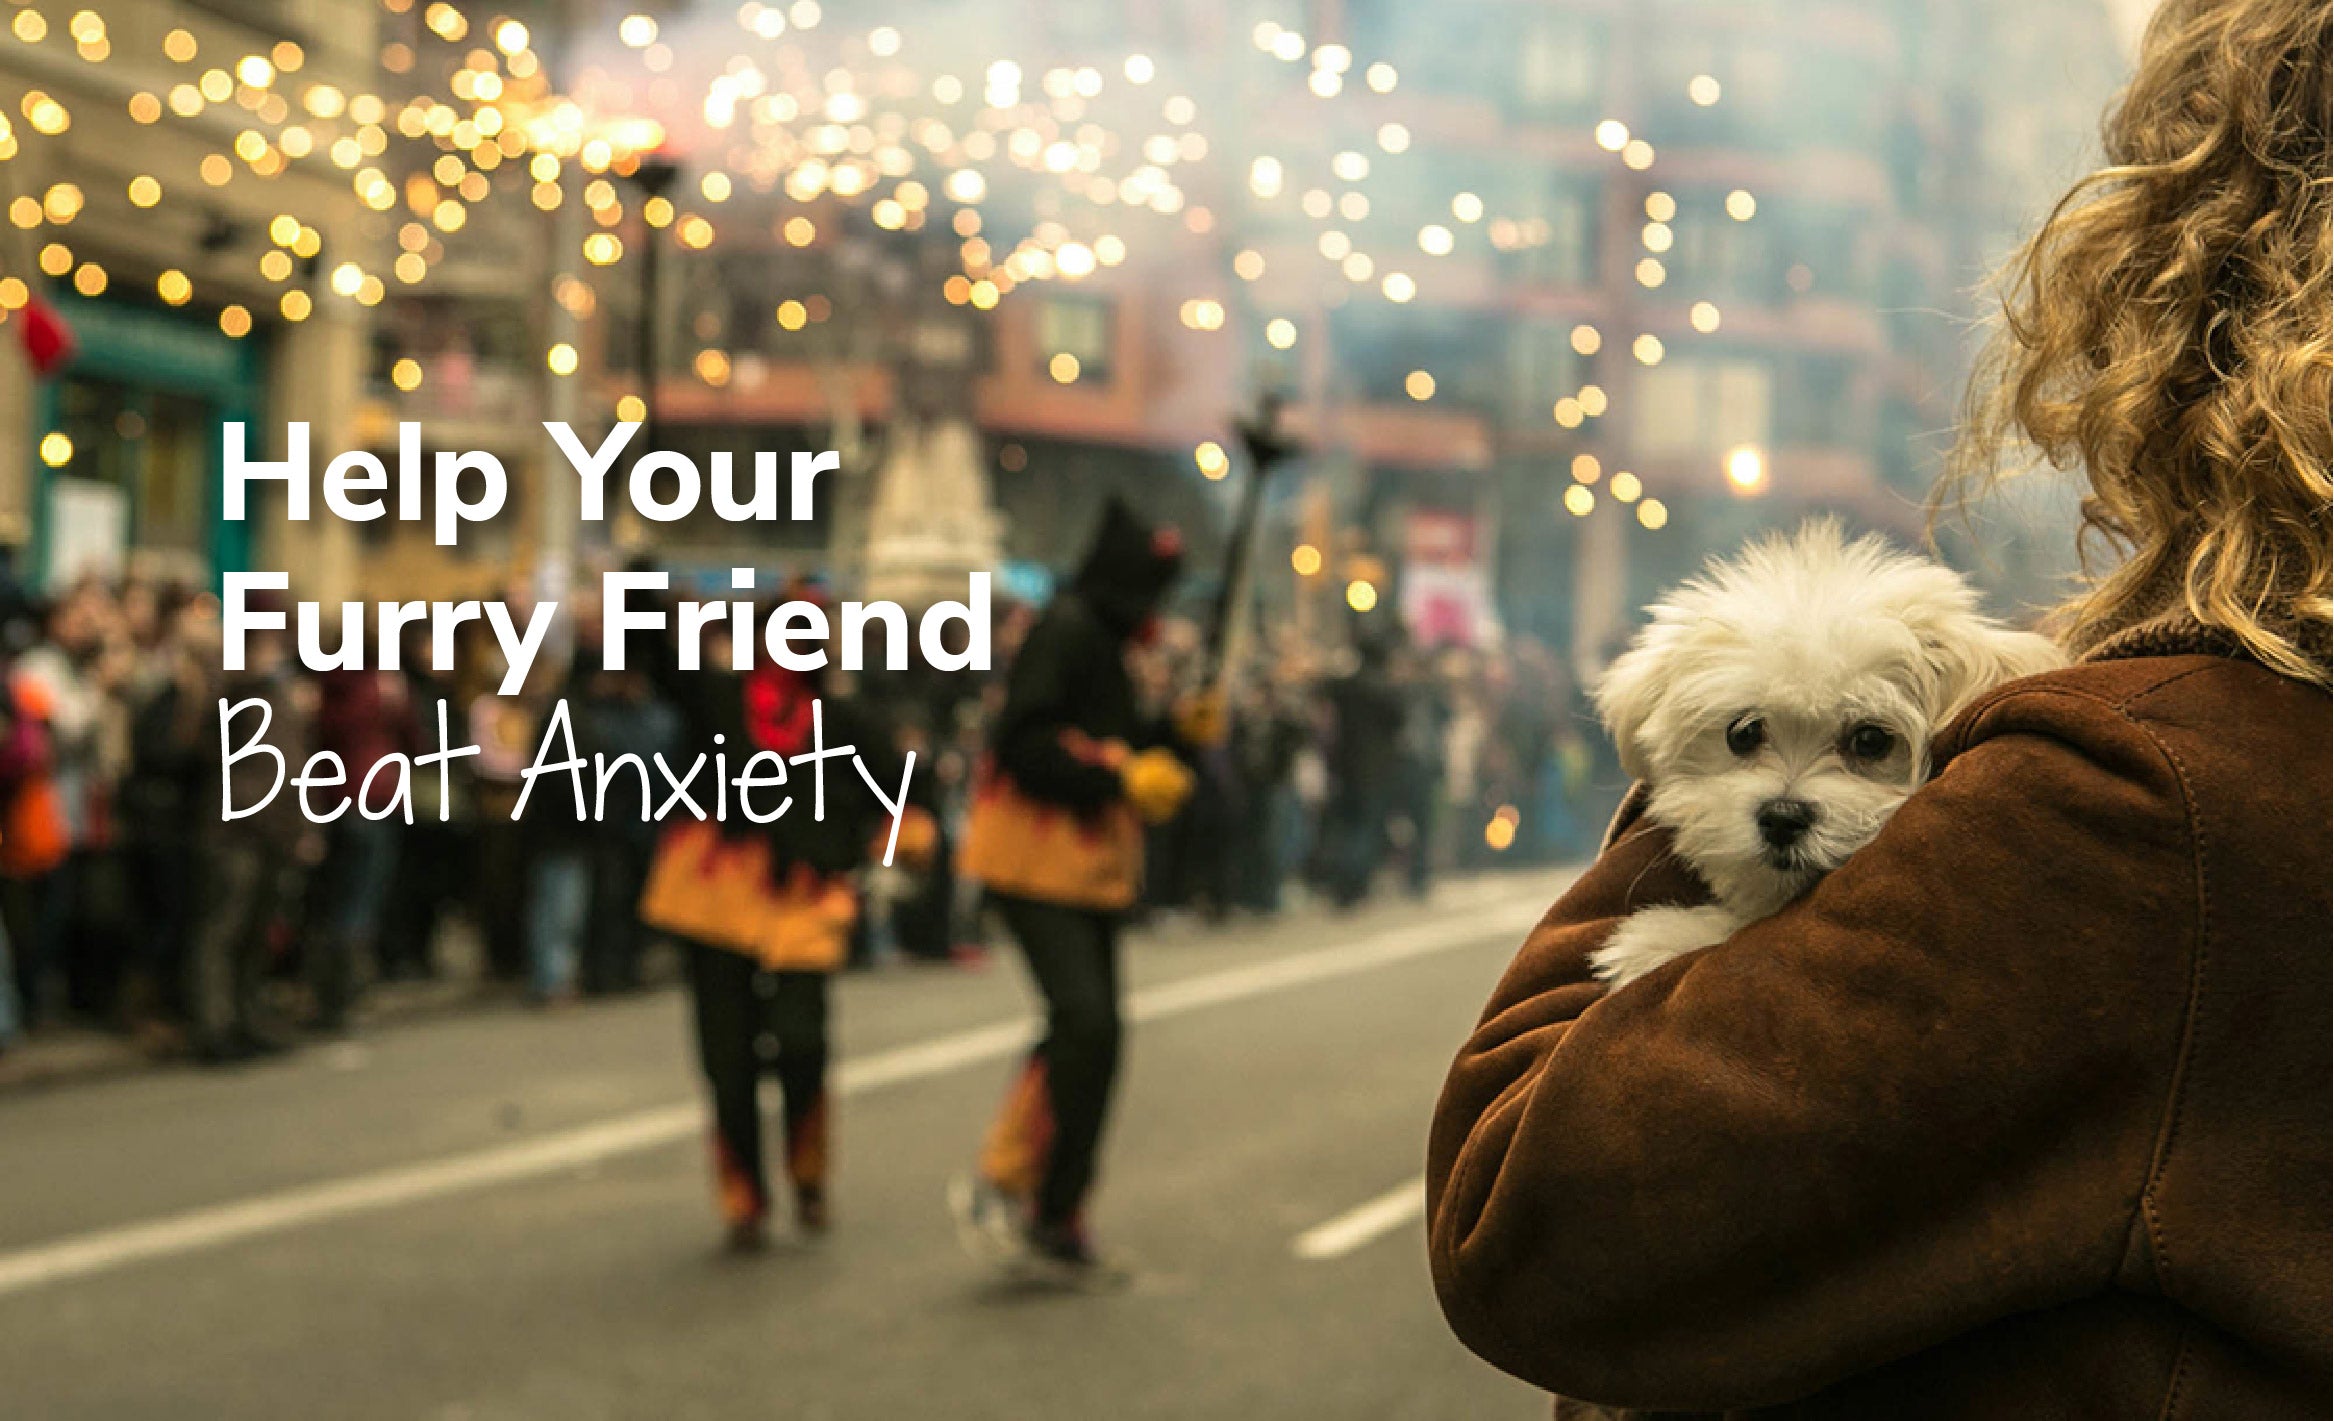 Help Your Furry Friend Beat Anxiety - Benefits Of CBD For Anxiety